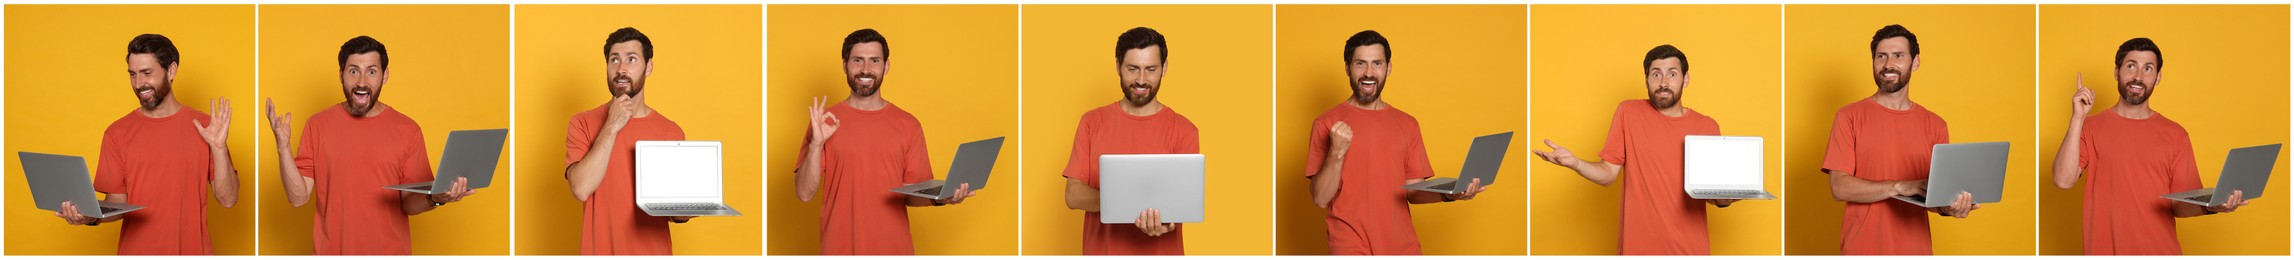 Image of Collage with photos of man holding modern laptops on yellow background. Banner design